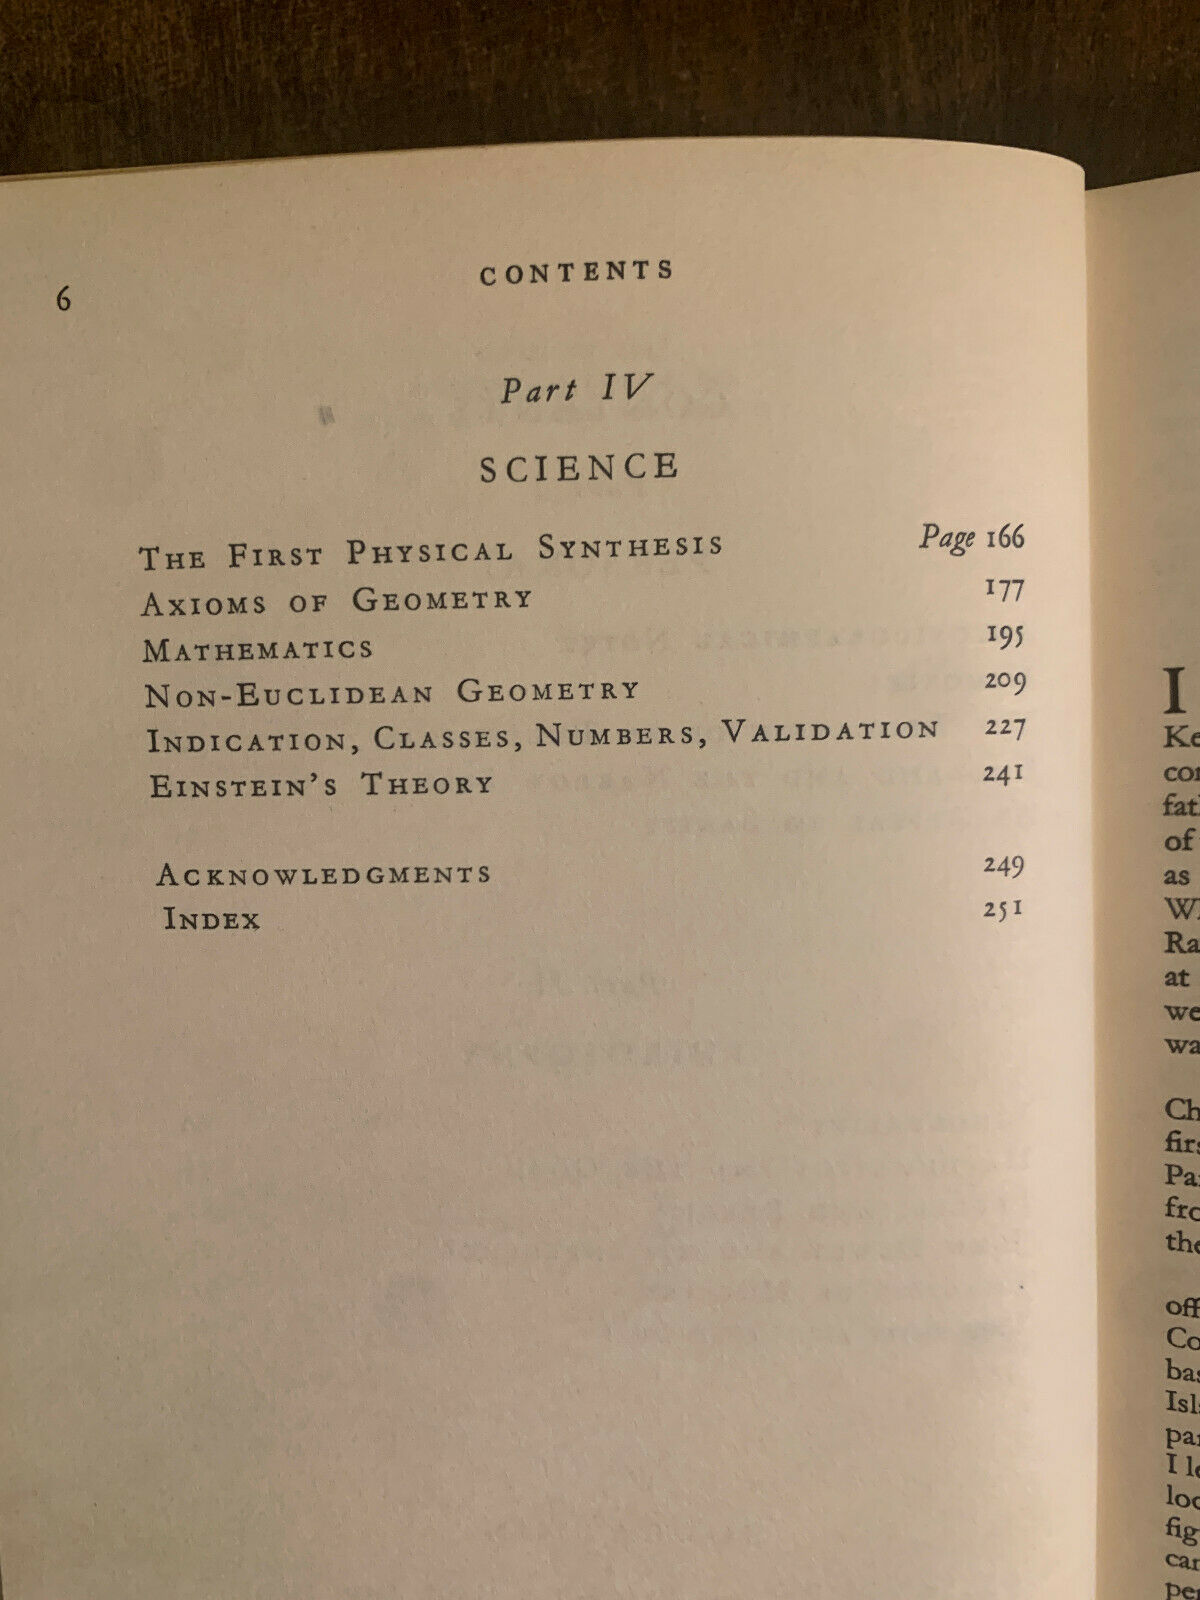 Essays in Science and Philosophy by Alfred North Whitehead (1948) (Z1)